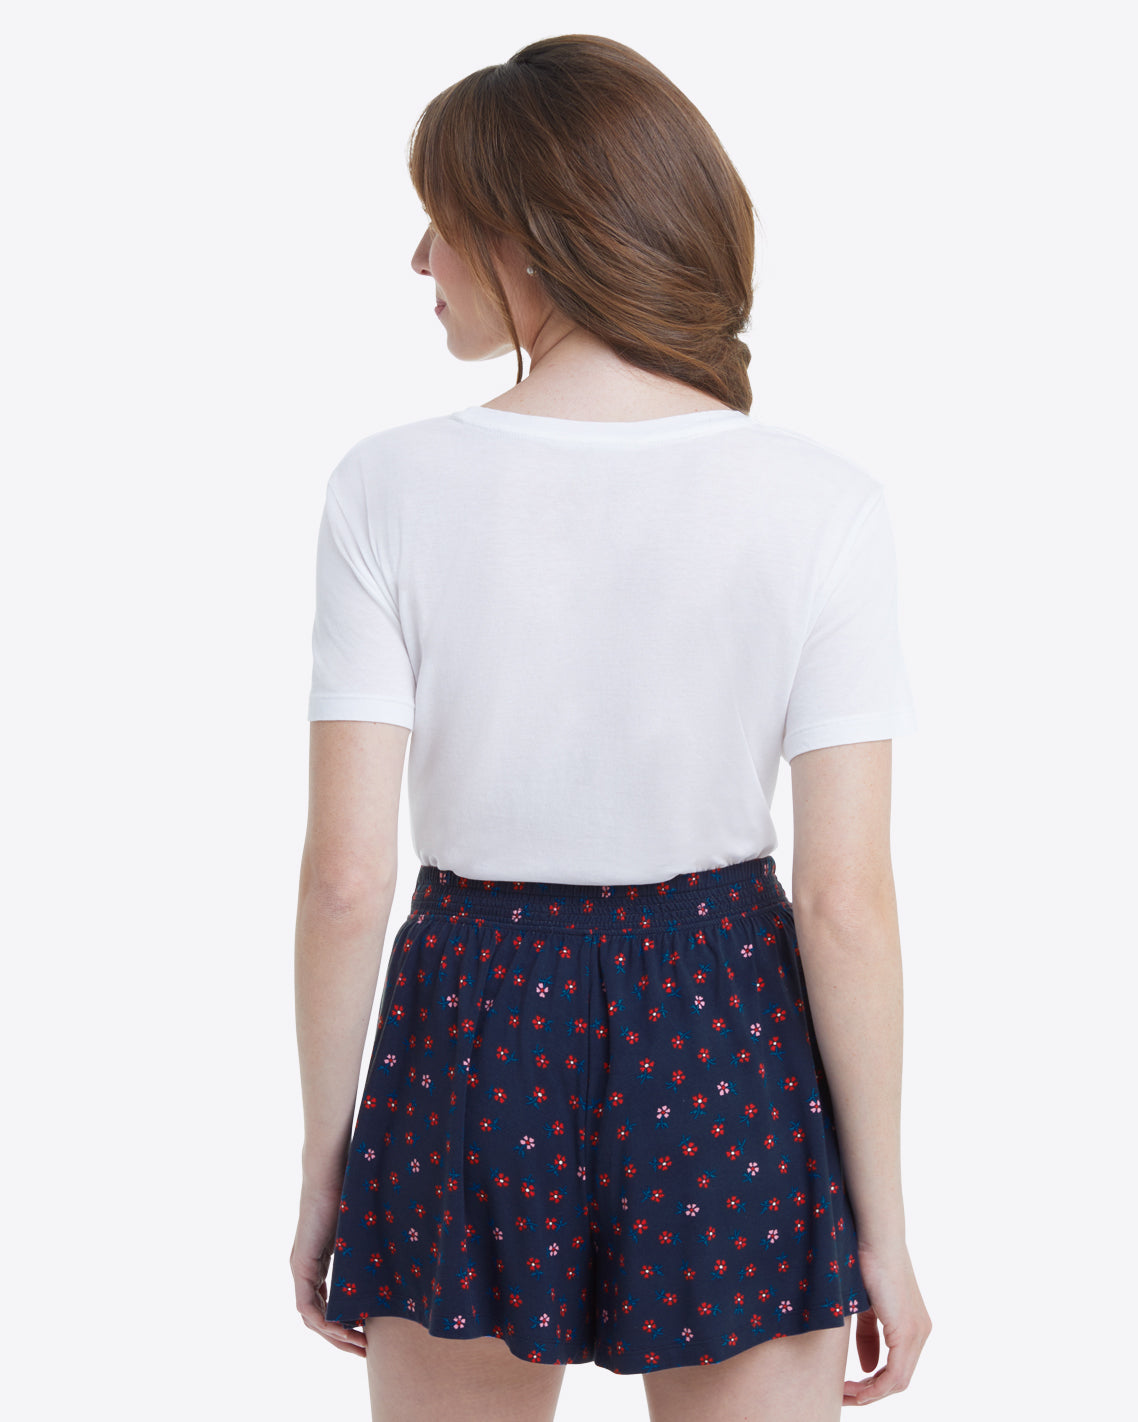 Relaxed Pull On Short in Falling Daisies